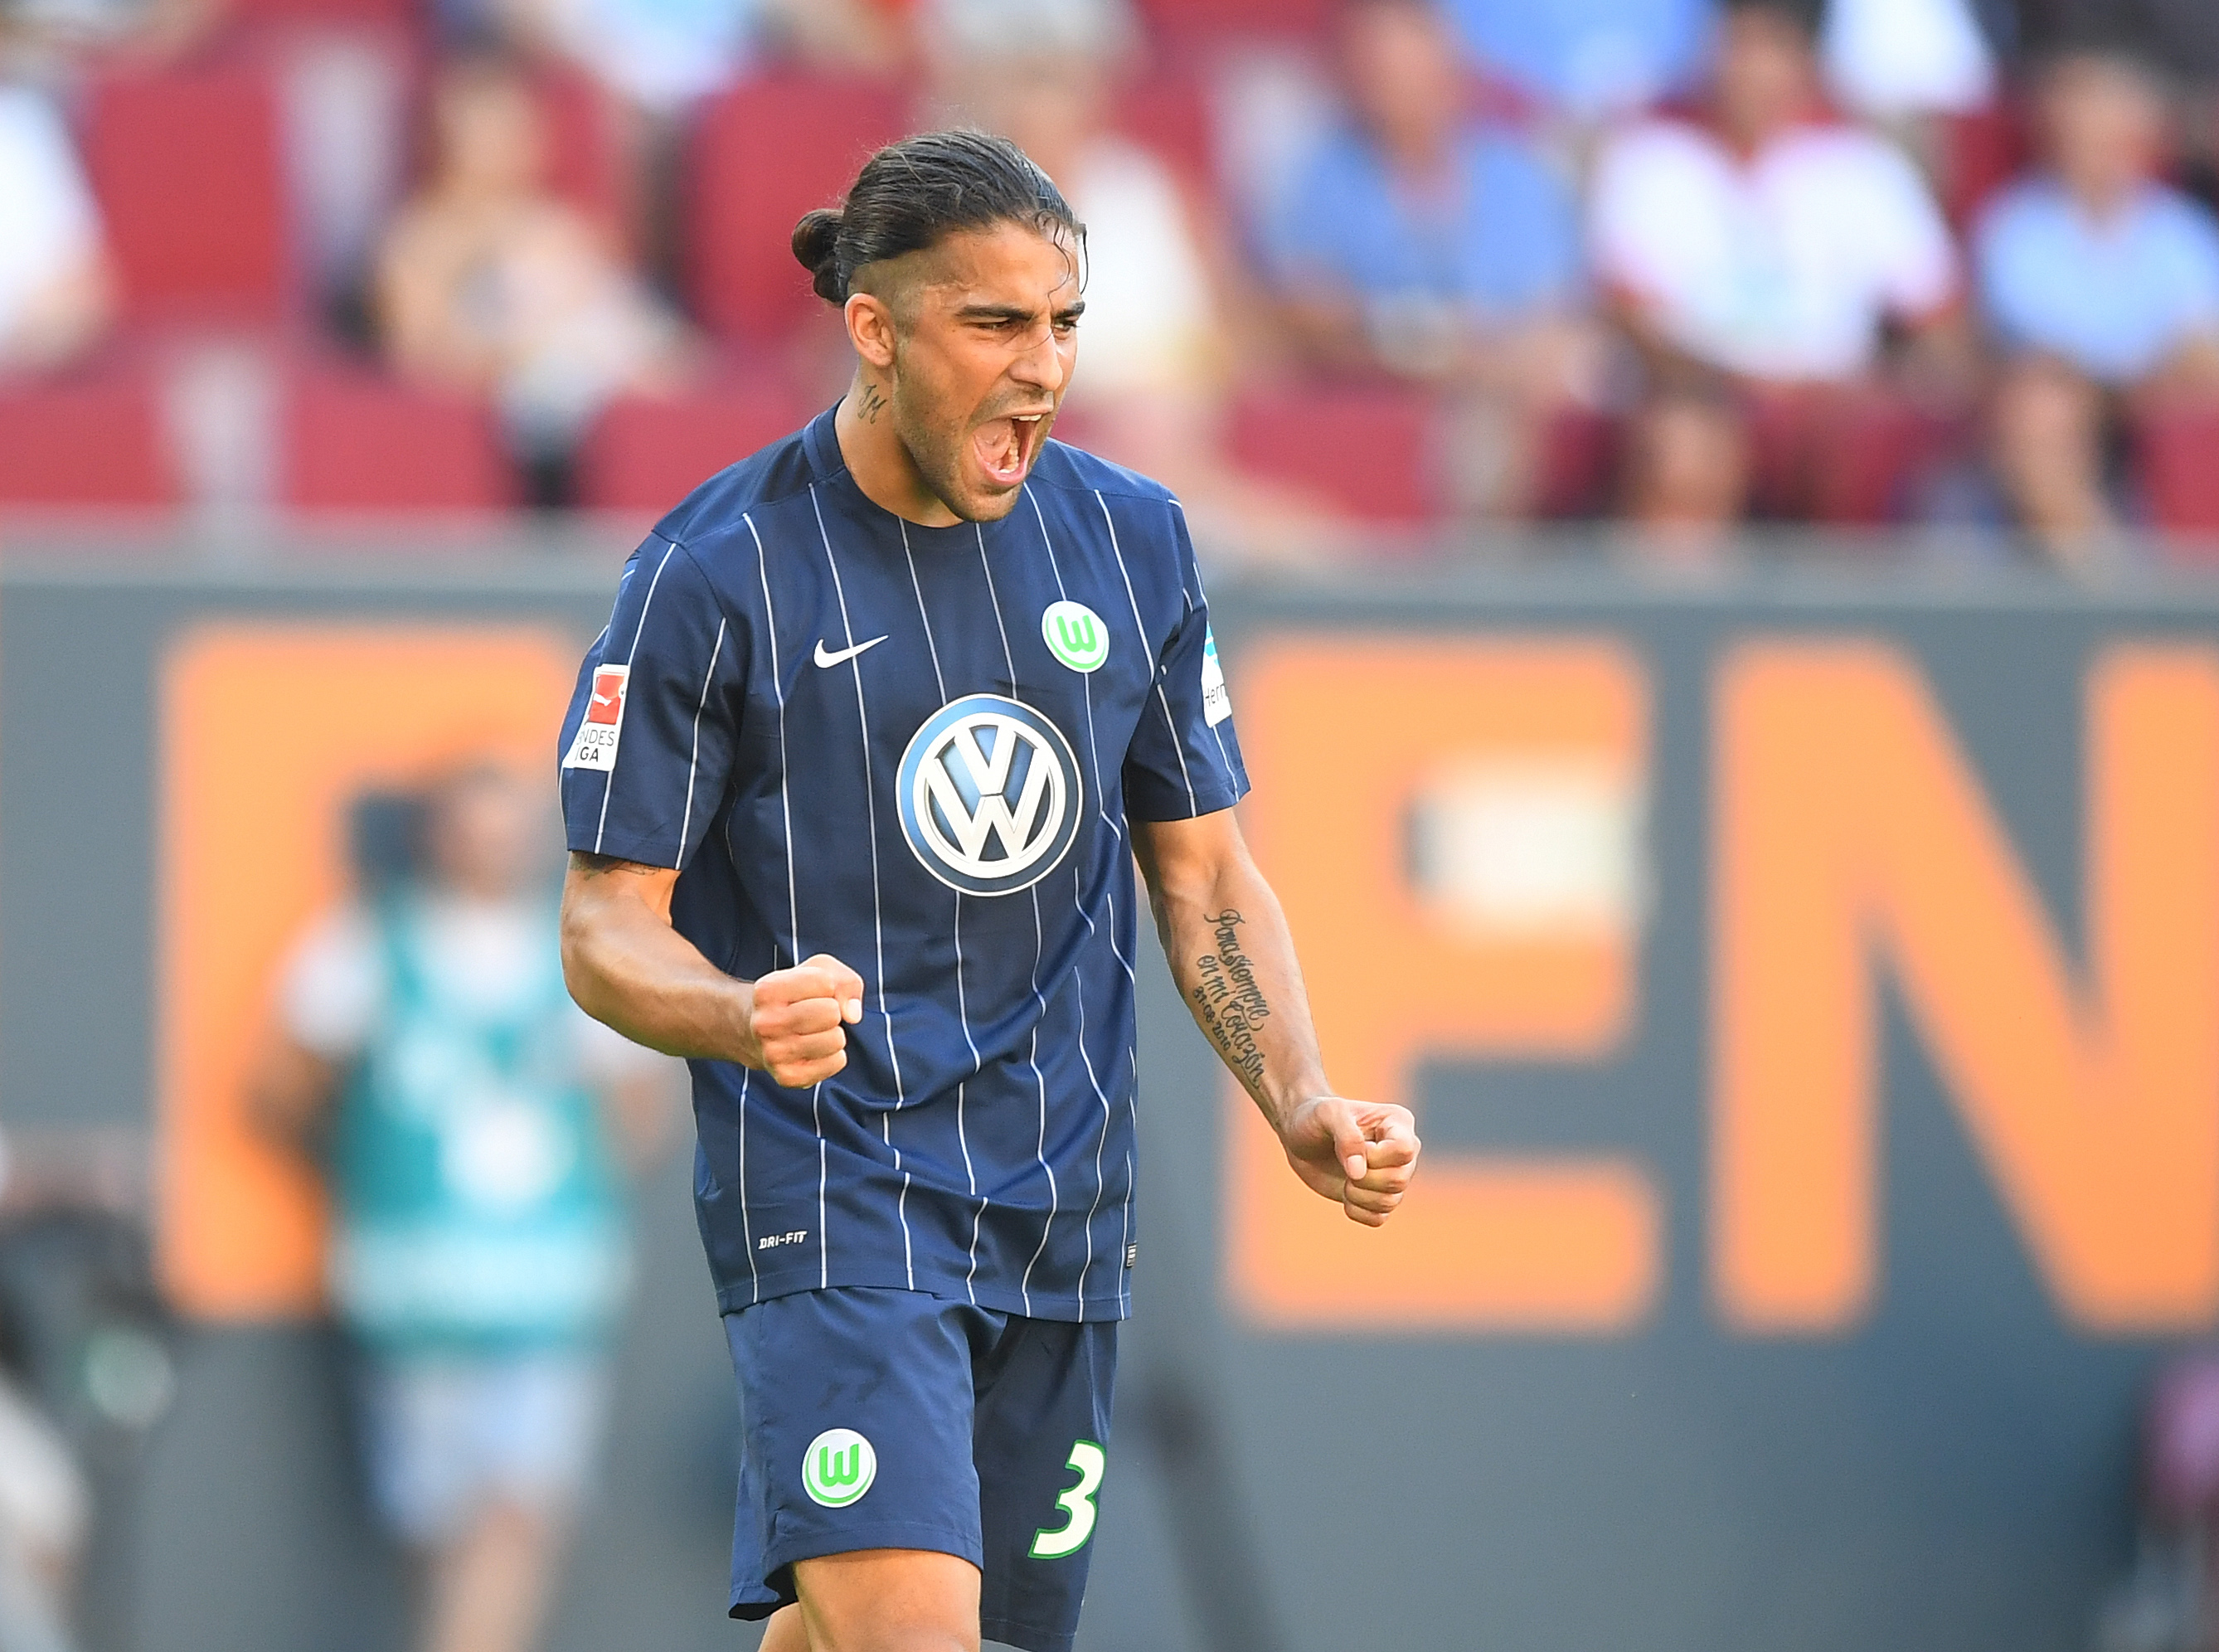 AUGSBURG, GERMANY - AUGUST 27:  Ricardo Rodriguez of VfL Wolfsburg celebrates his team's second goal during the Bundesliga match between FC Augsburg and VfL Wolfsburg at WWK Arena on August 27, 2016 in Augsburg, Germany.  (Photo by Lennart Preiss/Bongarts/Getty Images)